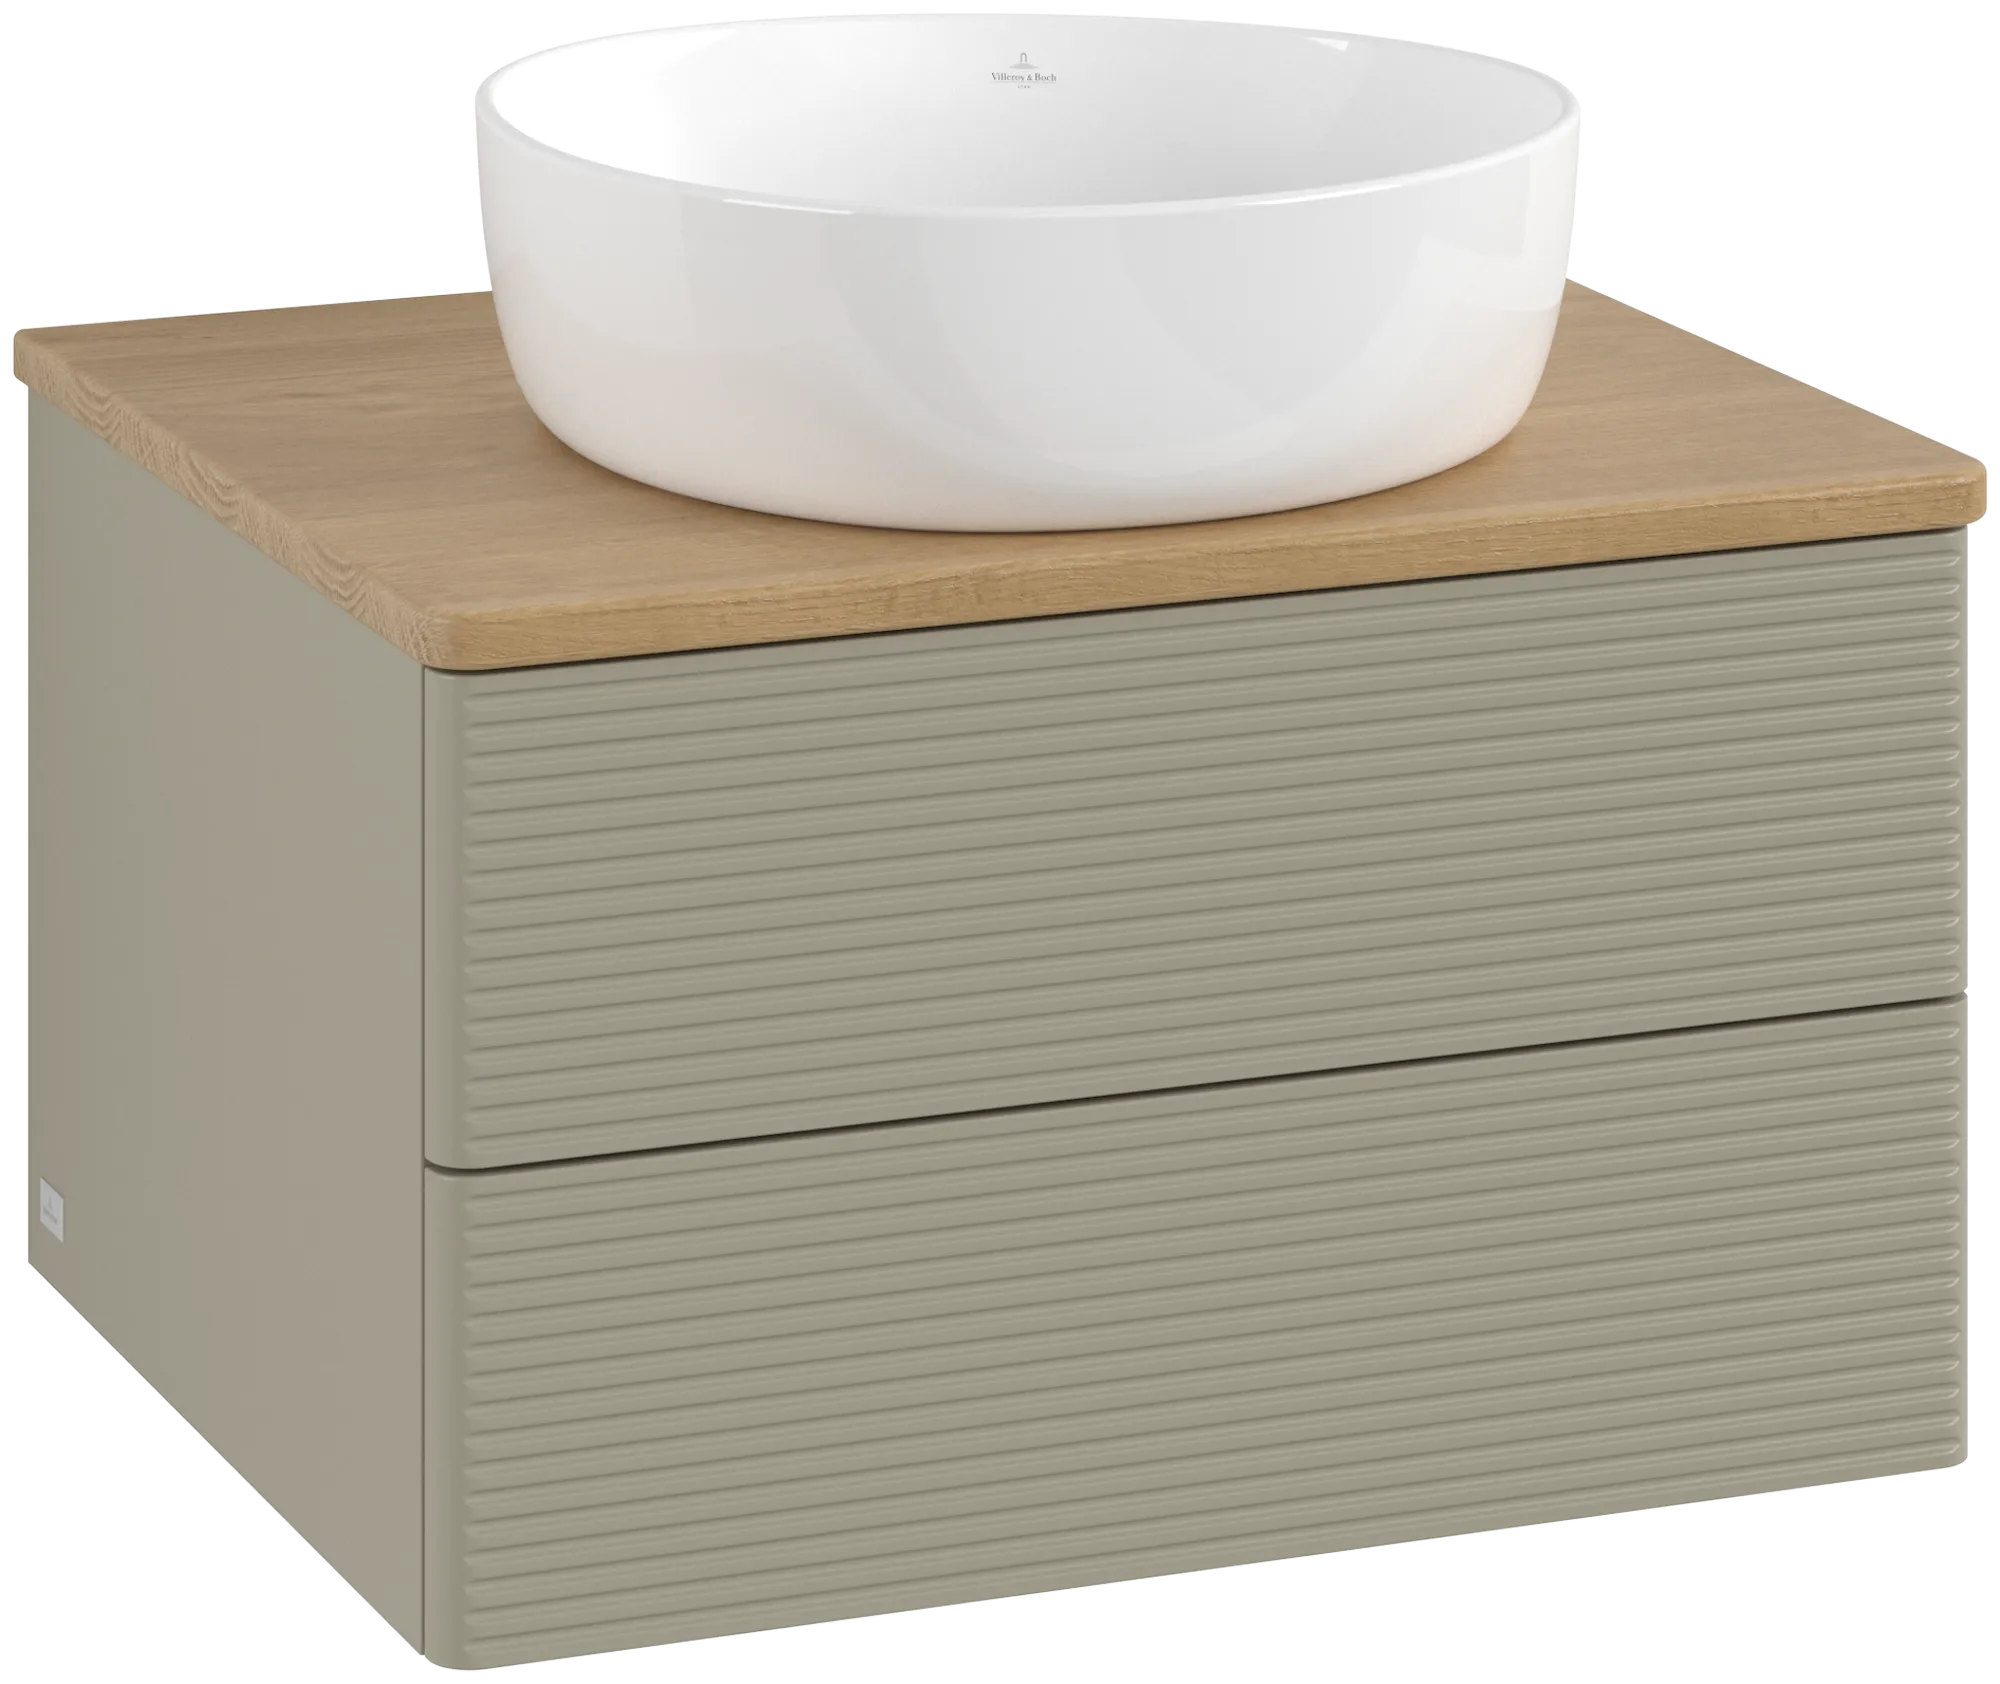 Picture of VILLEROY BOCH Antao Vanity unit, with lighting, 2 pull-out compartments, 600 x 360 x 500 mm, Front with grain texture, Stone Grey Matt Lacquer / Honey Oak #L18111HK